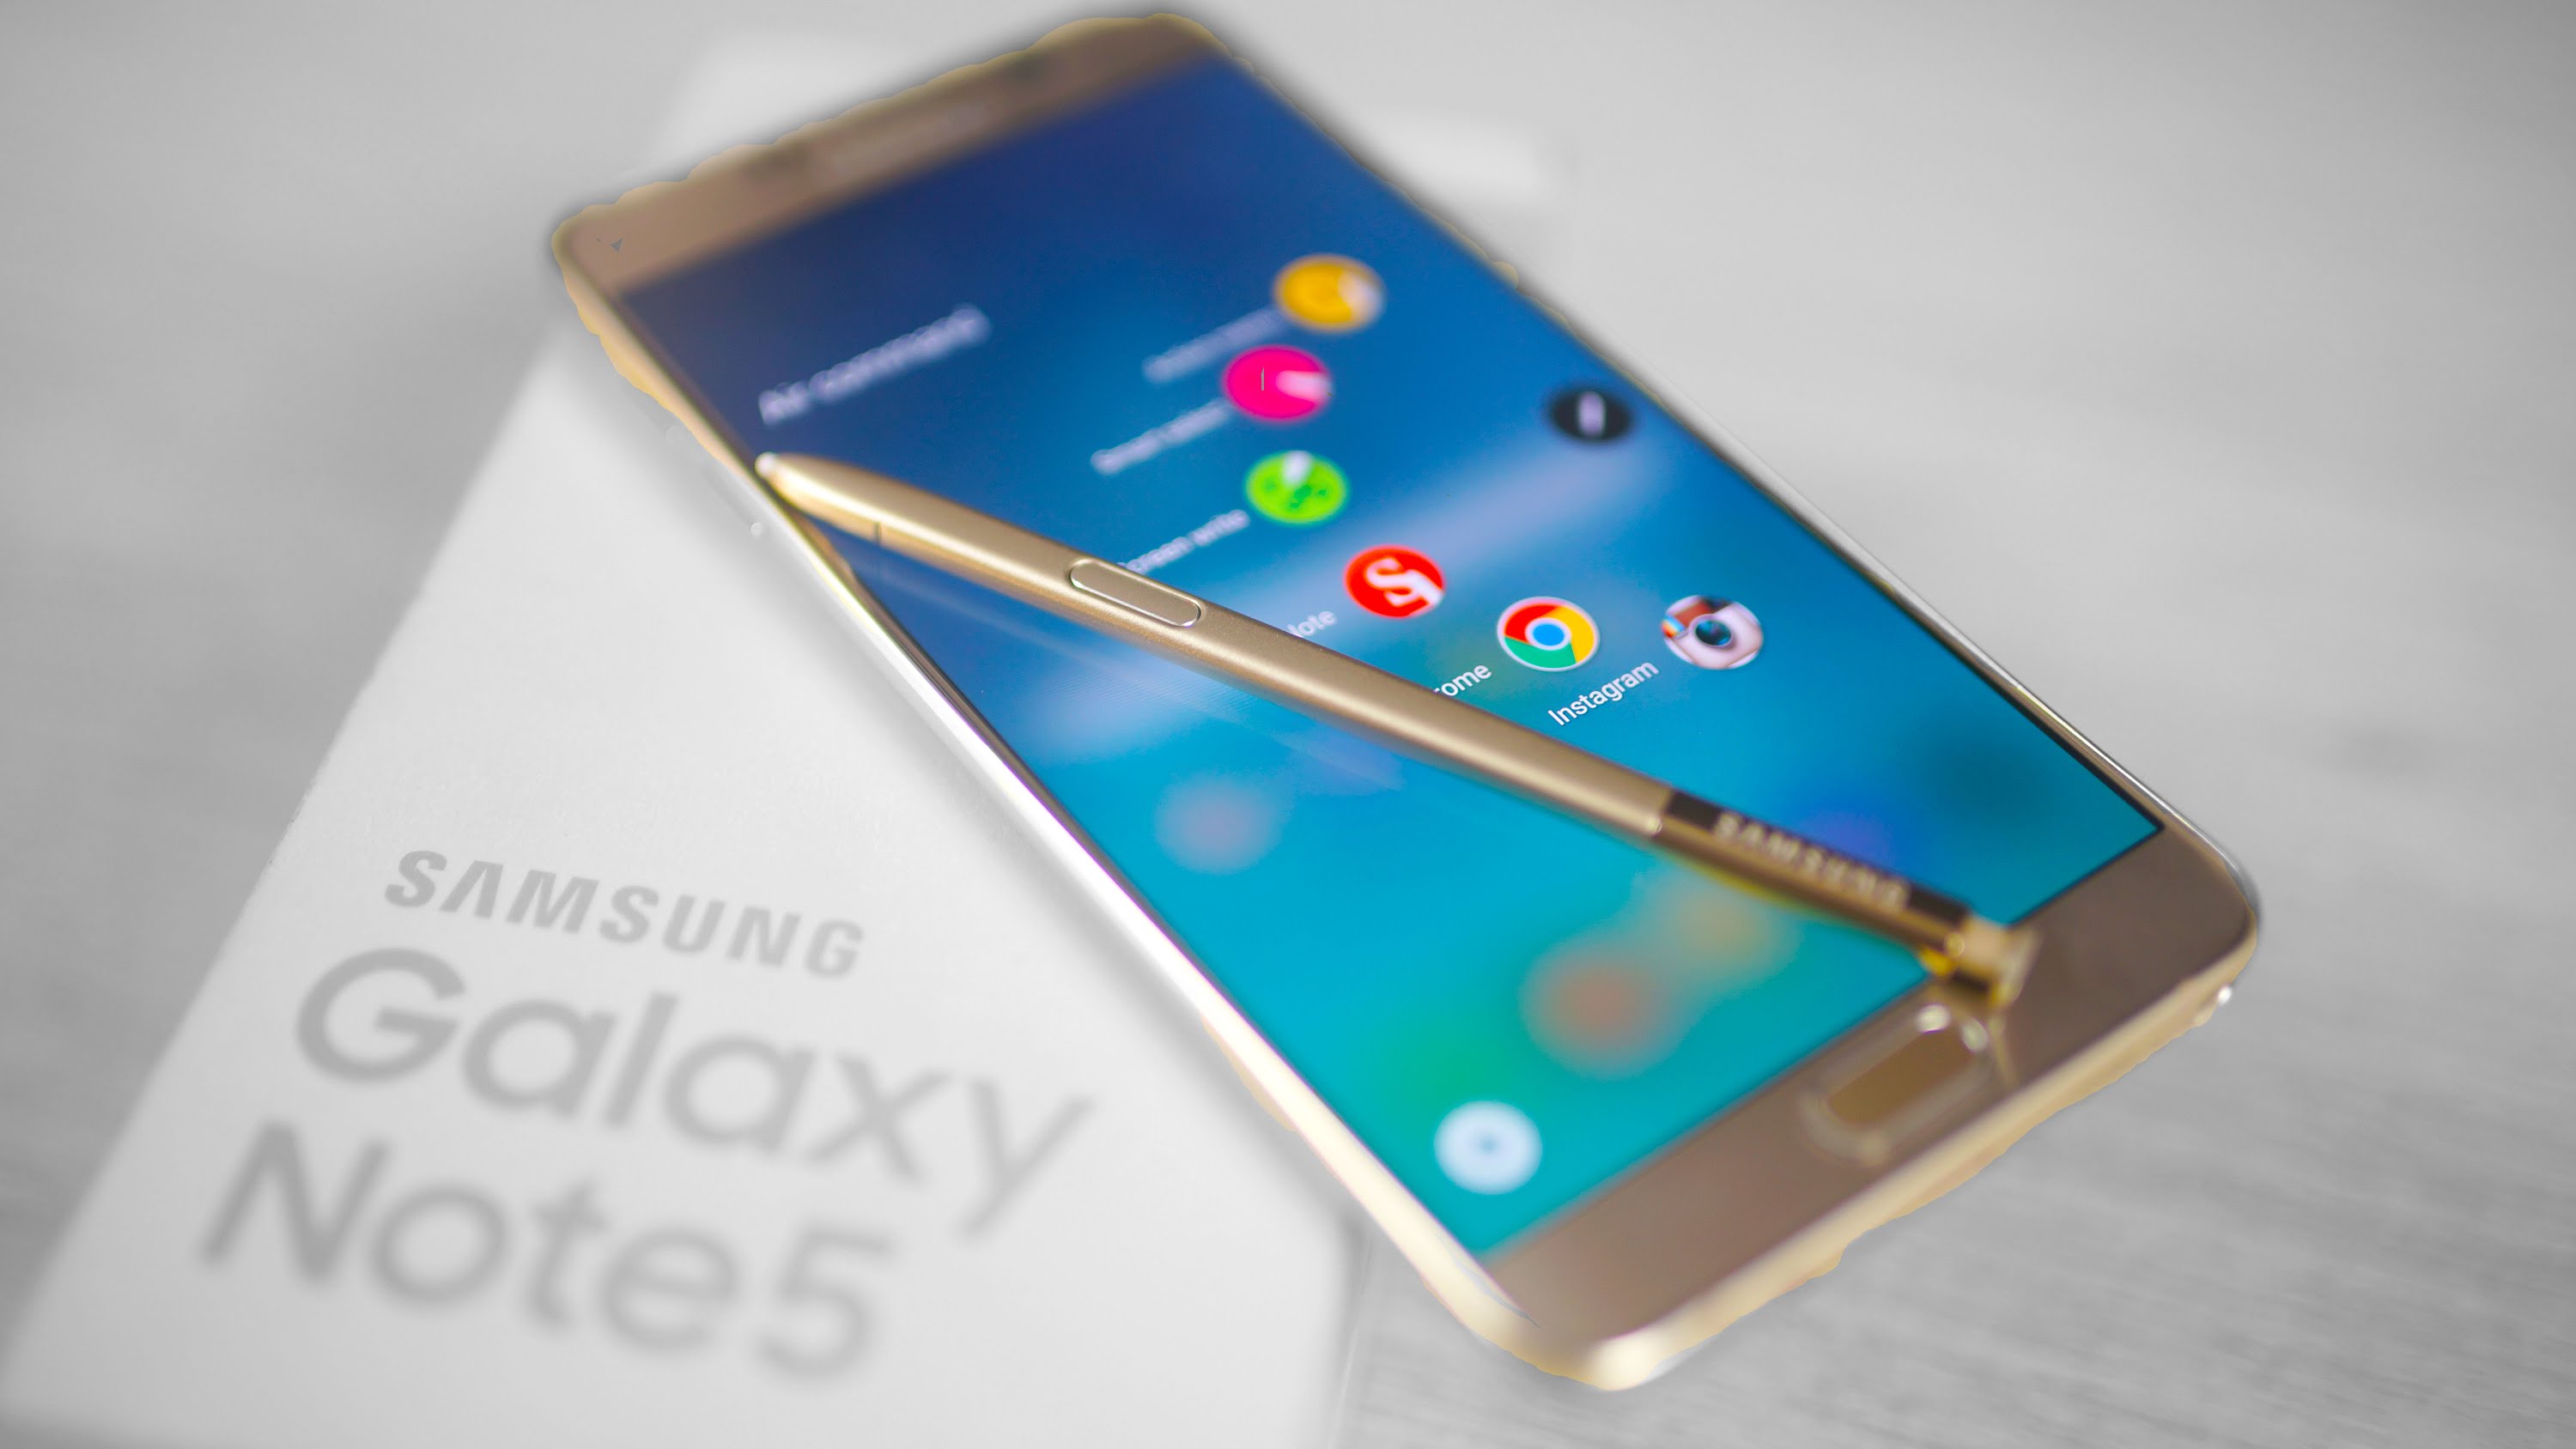 Spring Pushes the Marshmallow Update Button for Galaxy Note 5 1